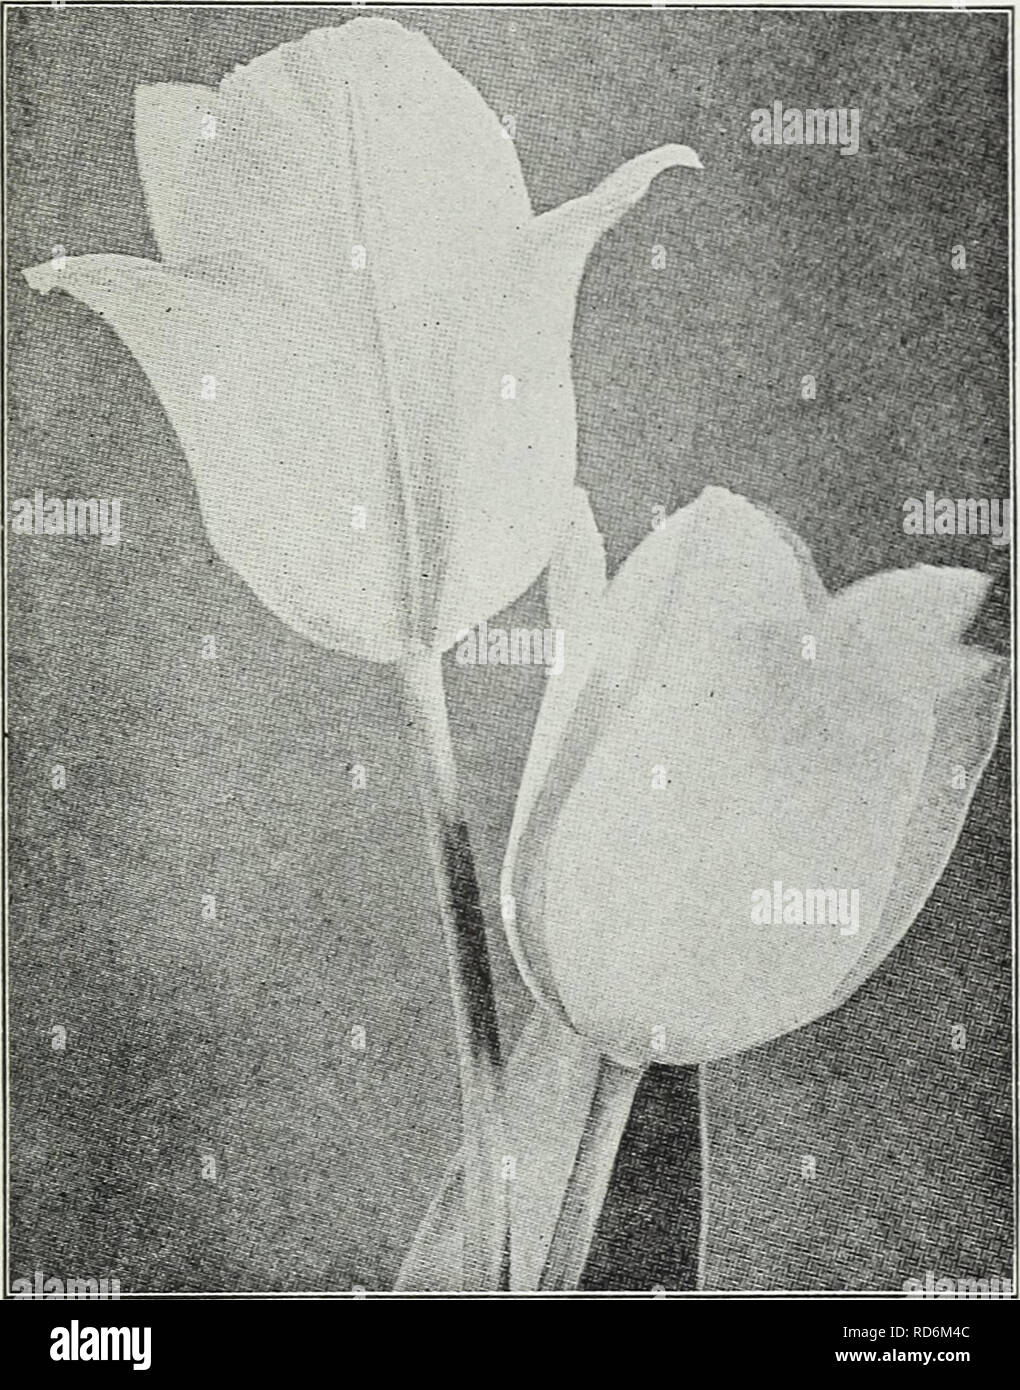 . Currie's bulbs and plants : autumn 1928. Flowers Seeds Catalogs; Bulbs (Plants) Seeds Catalogs; Nurseries (Horticulture) Catalogs; Plants, Ornamental Catalogs. 130-132 East Wisconsin Avenue, Milwaukee, Wisconsin. Tulip Chryselora Early Double Flowering Tulips Doz. 100 Azalea (E. S) Beautiful deep rose flushed salmon 550.90 .l!«.r&gt;0 Boule lie ei«:e (E. 10) — Large pure white .85 (J.OO Couronne d'Or (Crorn of Gold) — (E. 10) Flower large and very double, rich golden yellow shaded orange S.&quot;i (5.00 Klectra (E. S) — Carmine shaded light violet l.'2H 9.0O caoria Soils — (E. 9) Very large Stock Photo